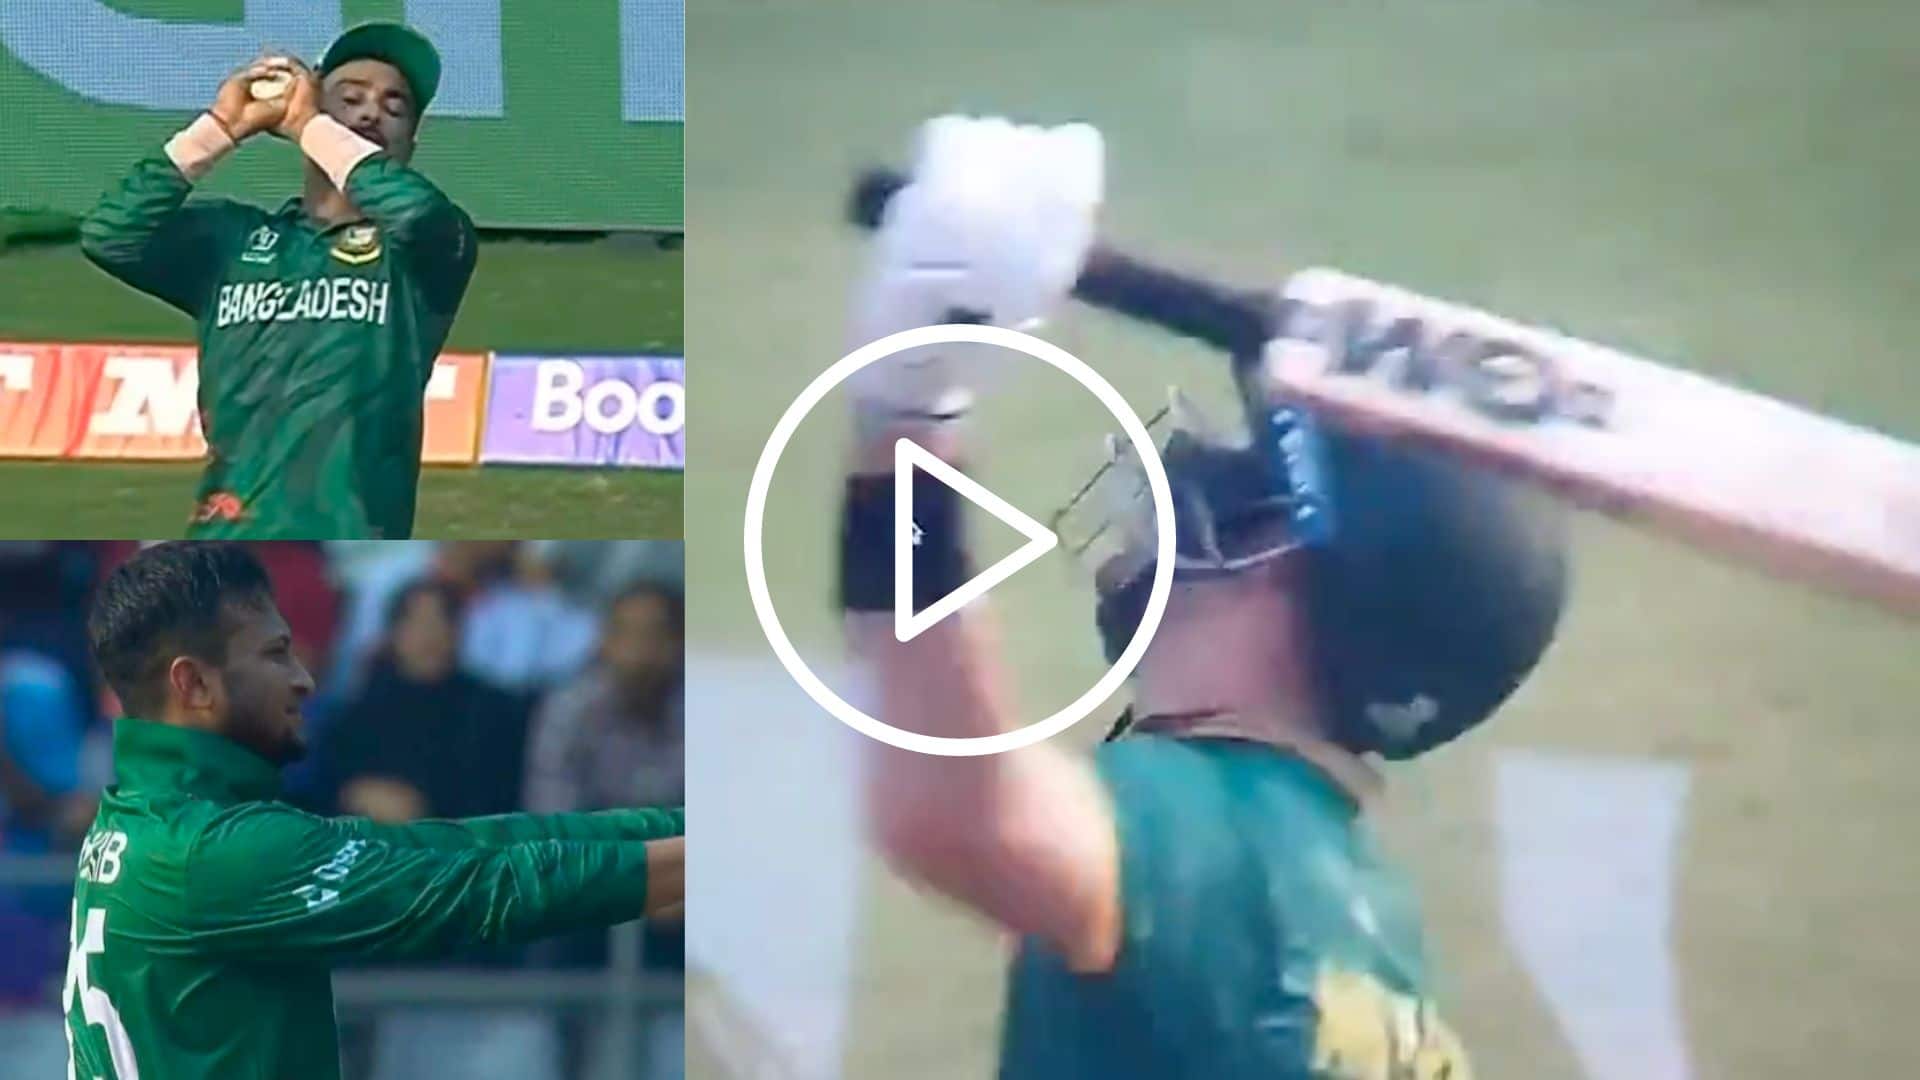 [Watch] Aiden Markram Gets In Agony As Shakib Al Hasan Does The Trick